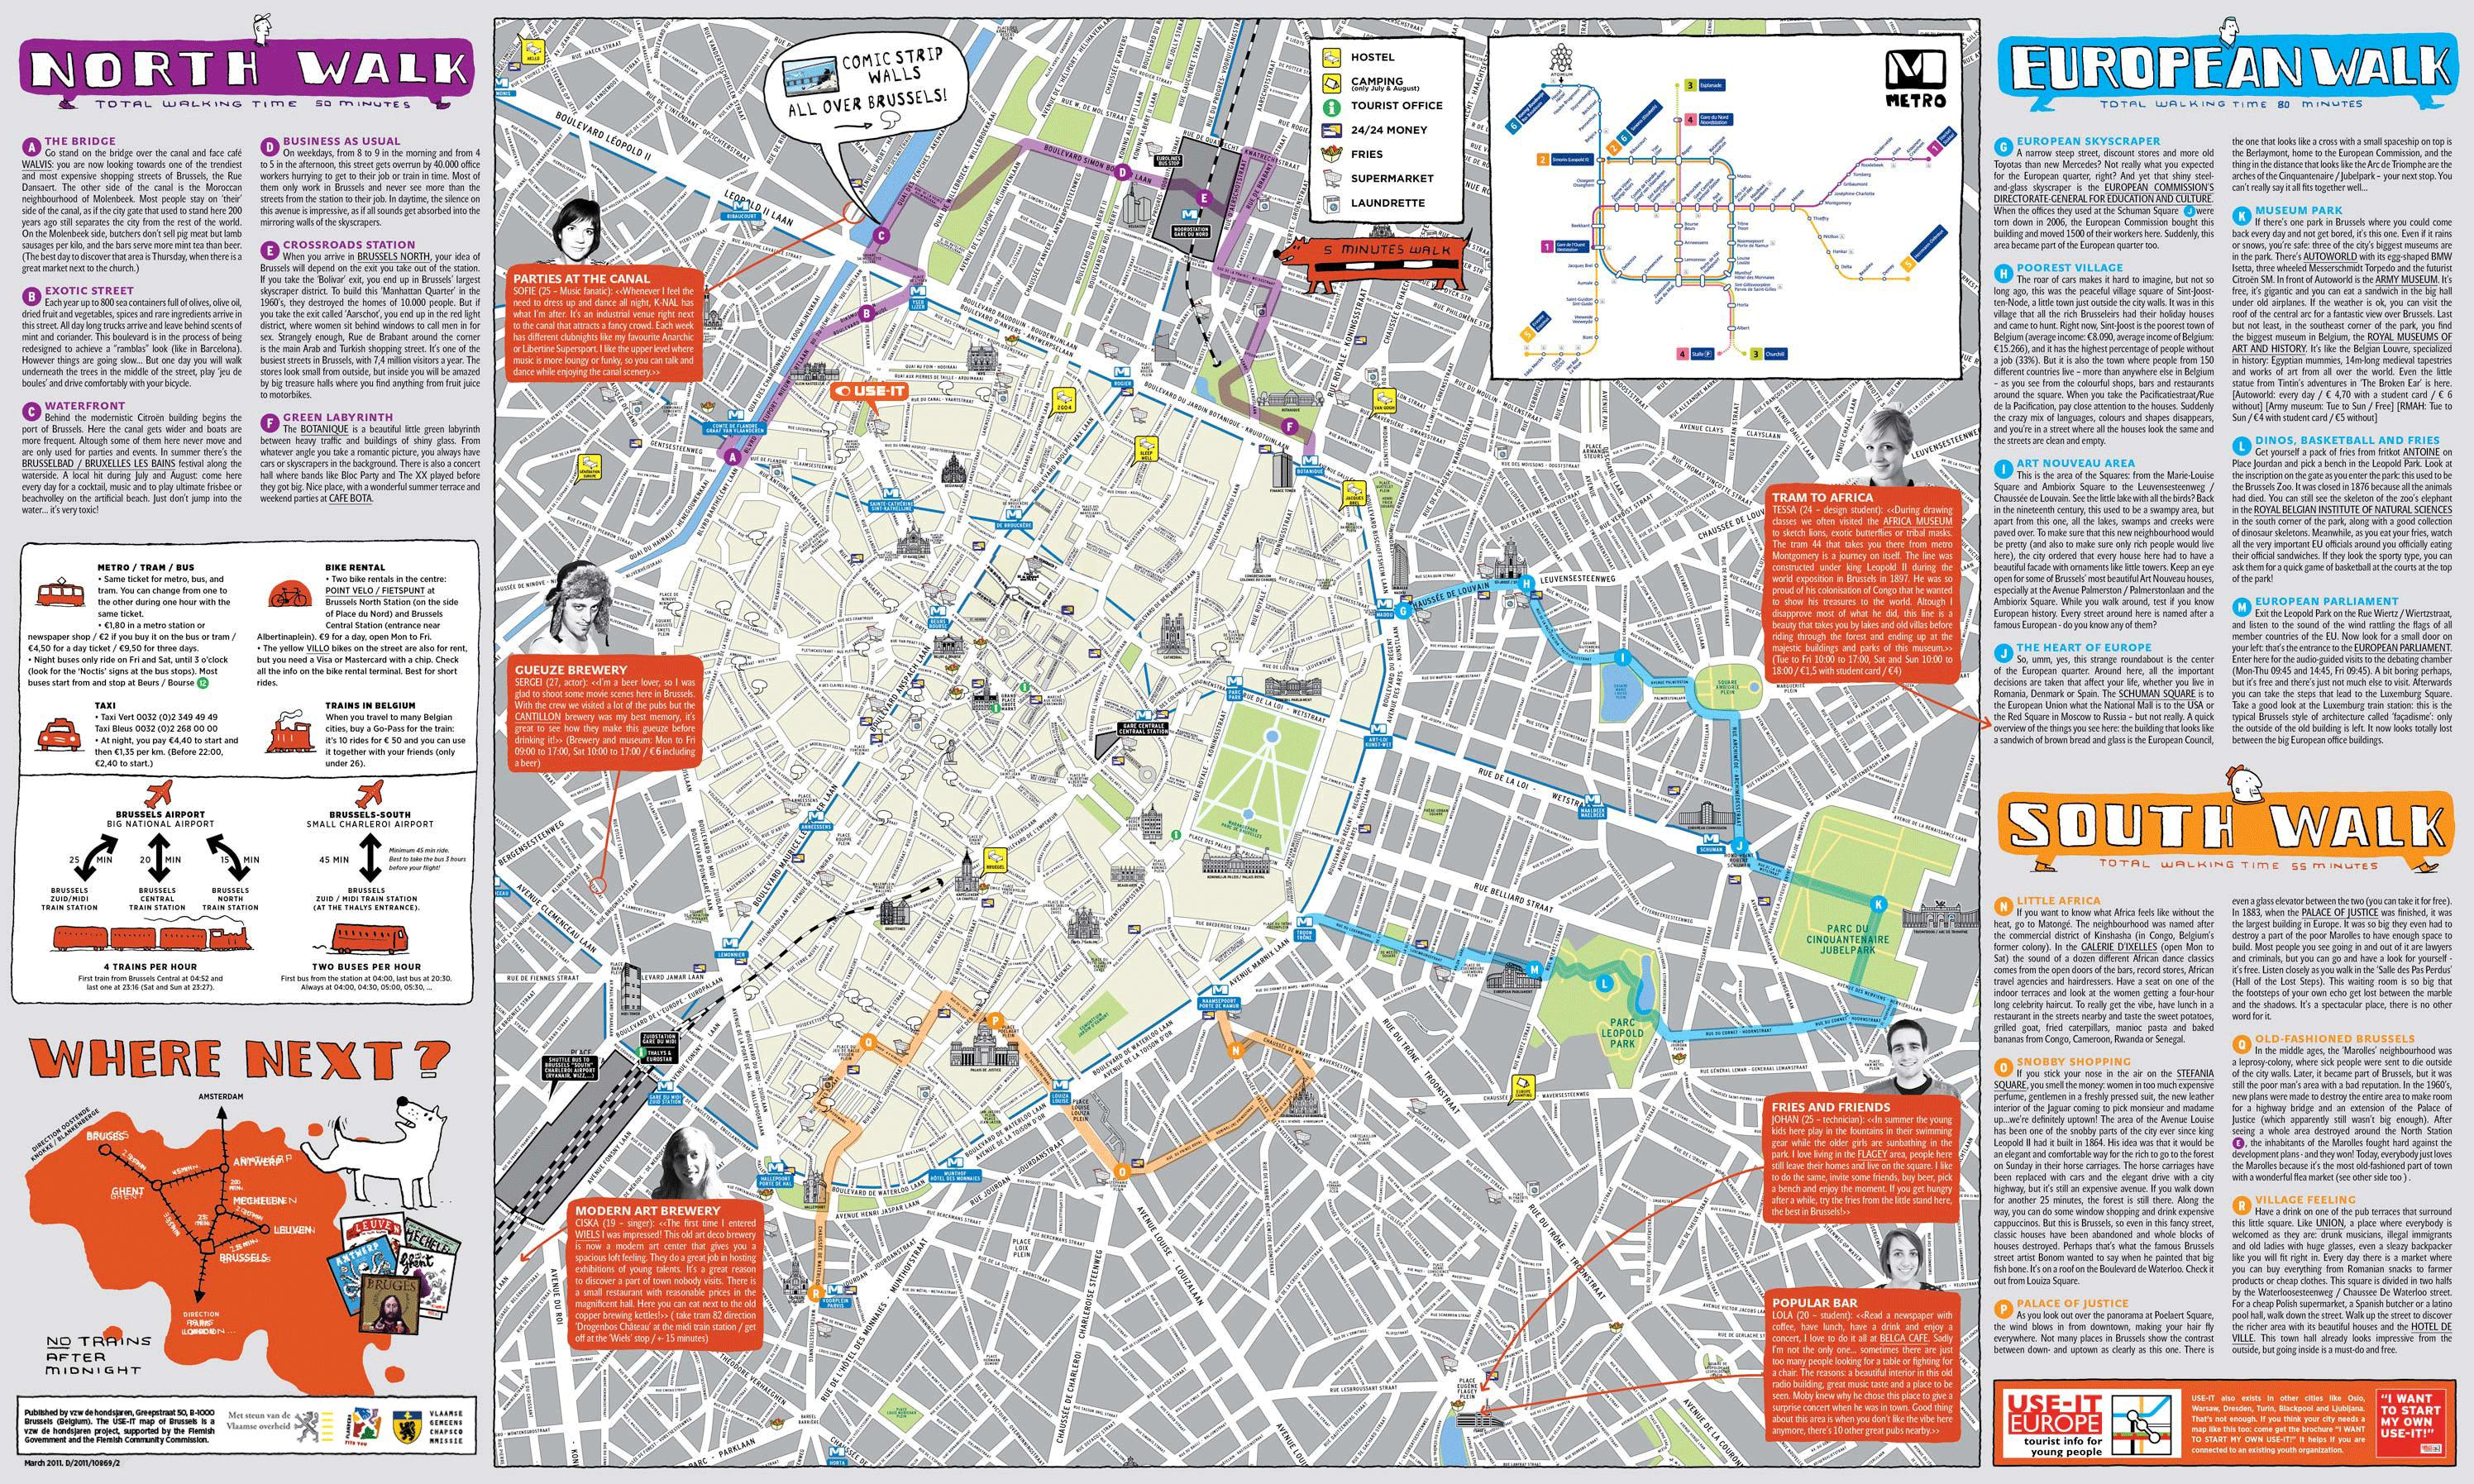 brussels tour map